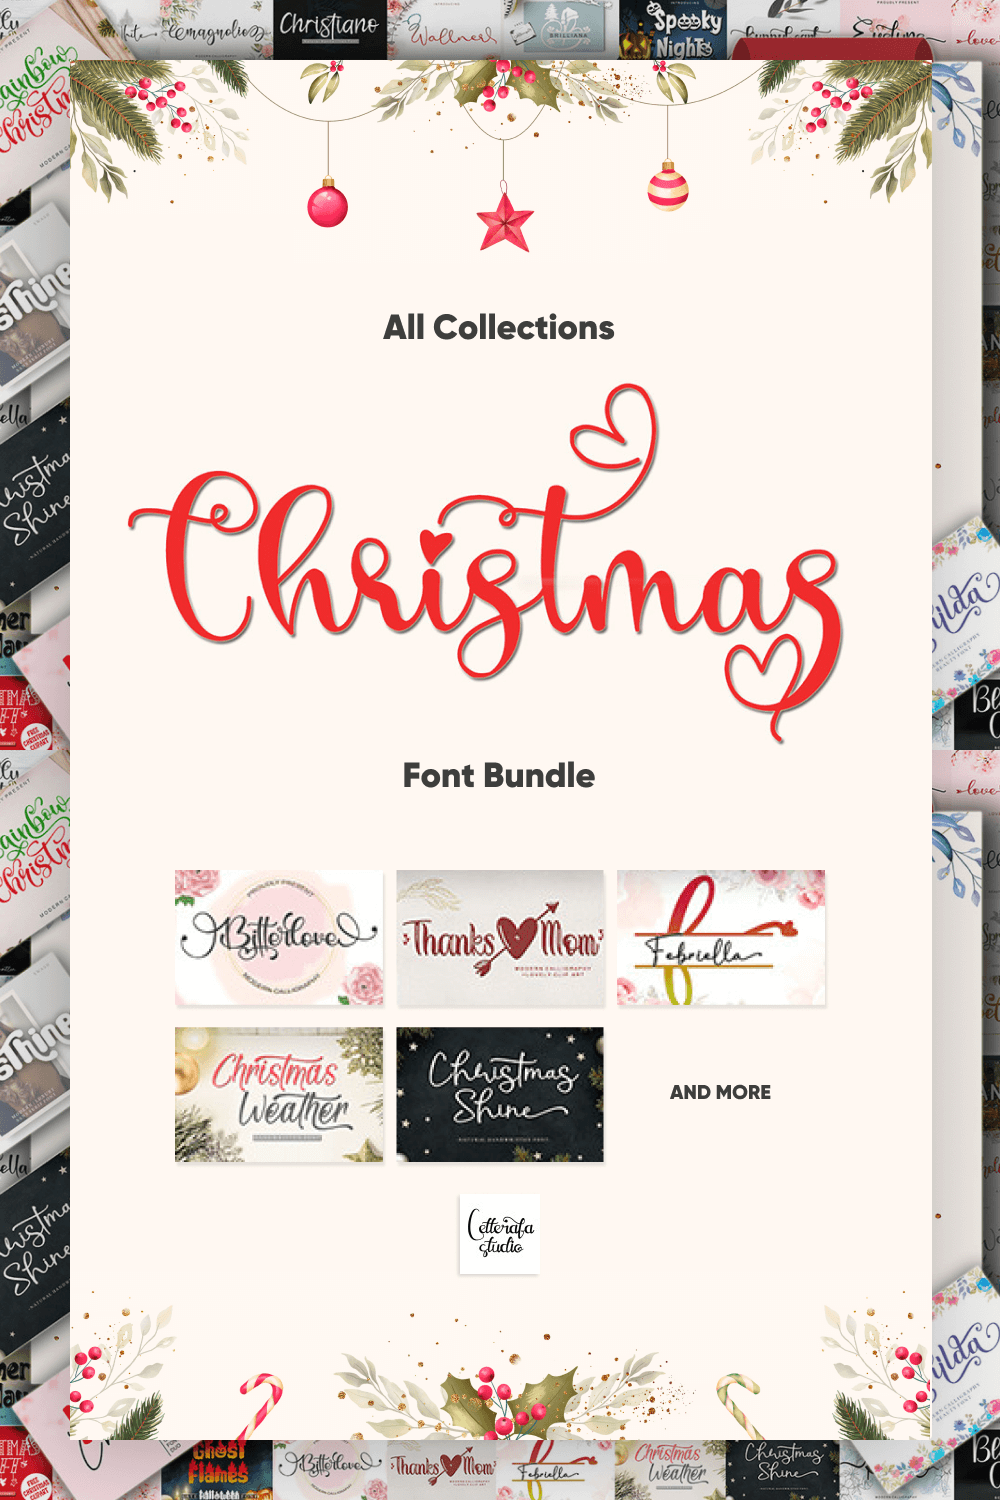 Image about All Collections Christmas Font Bundle.